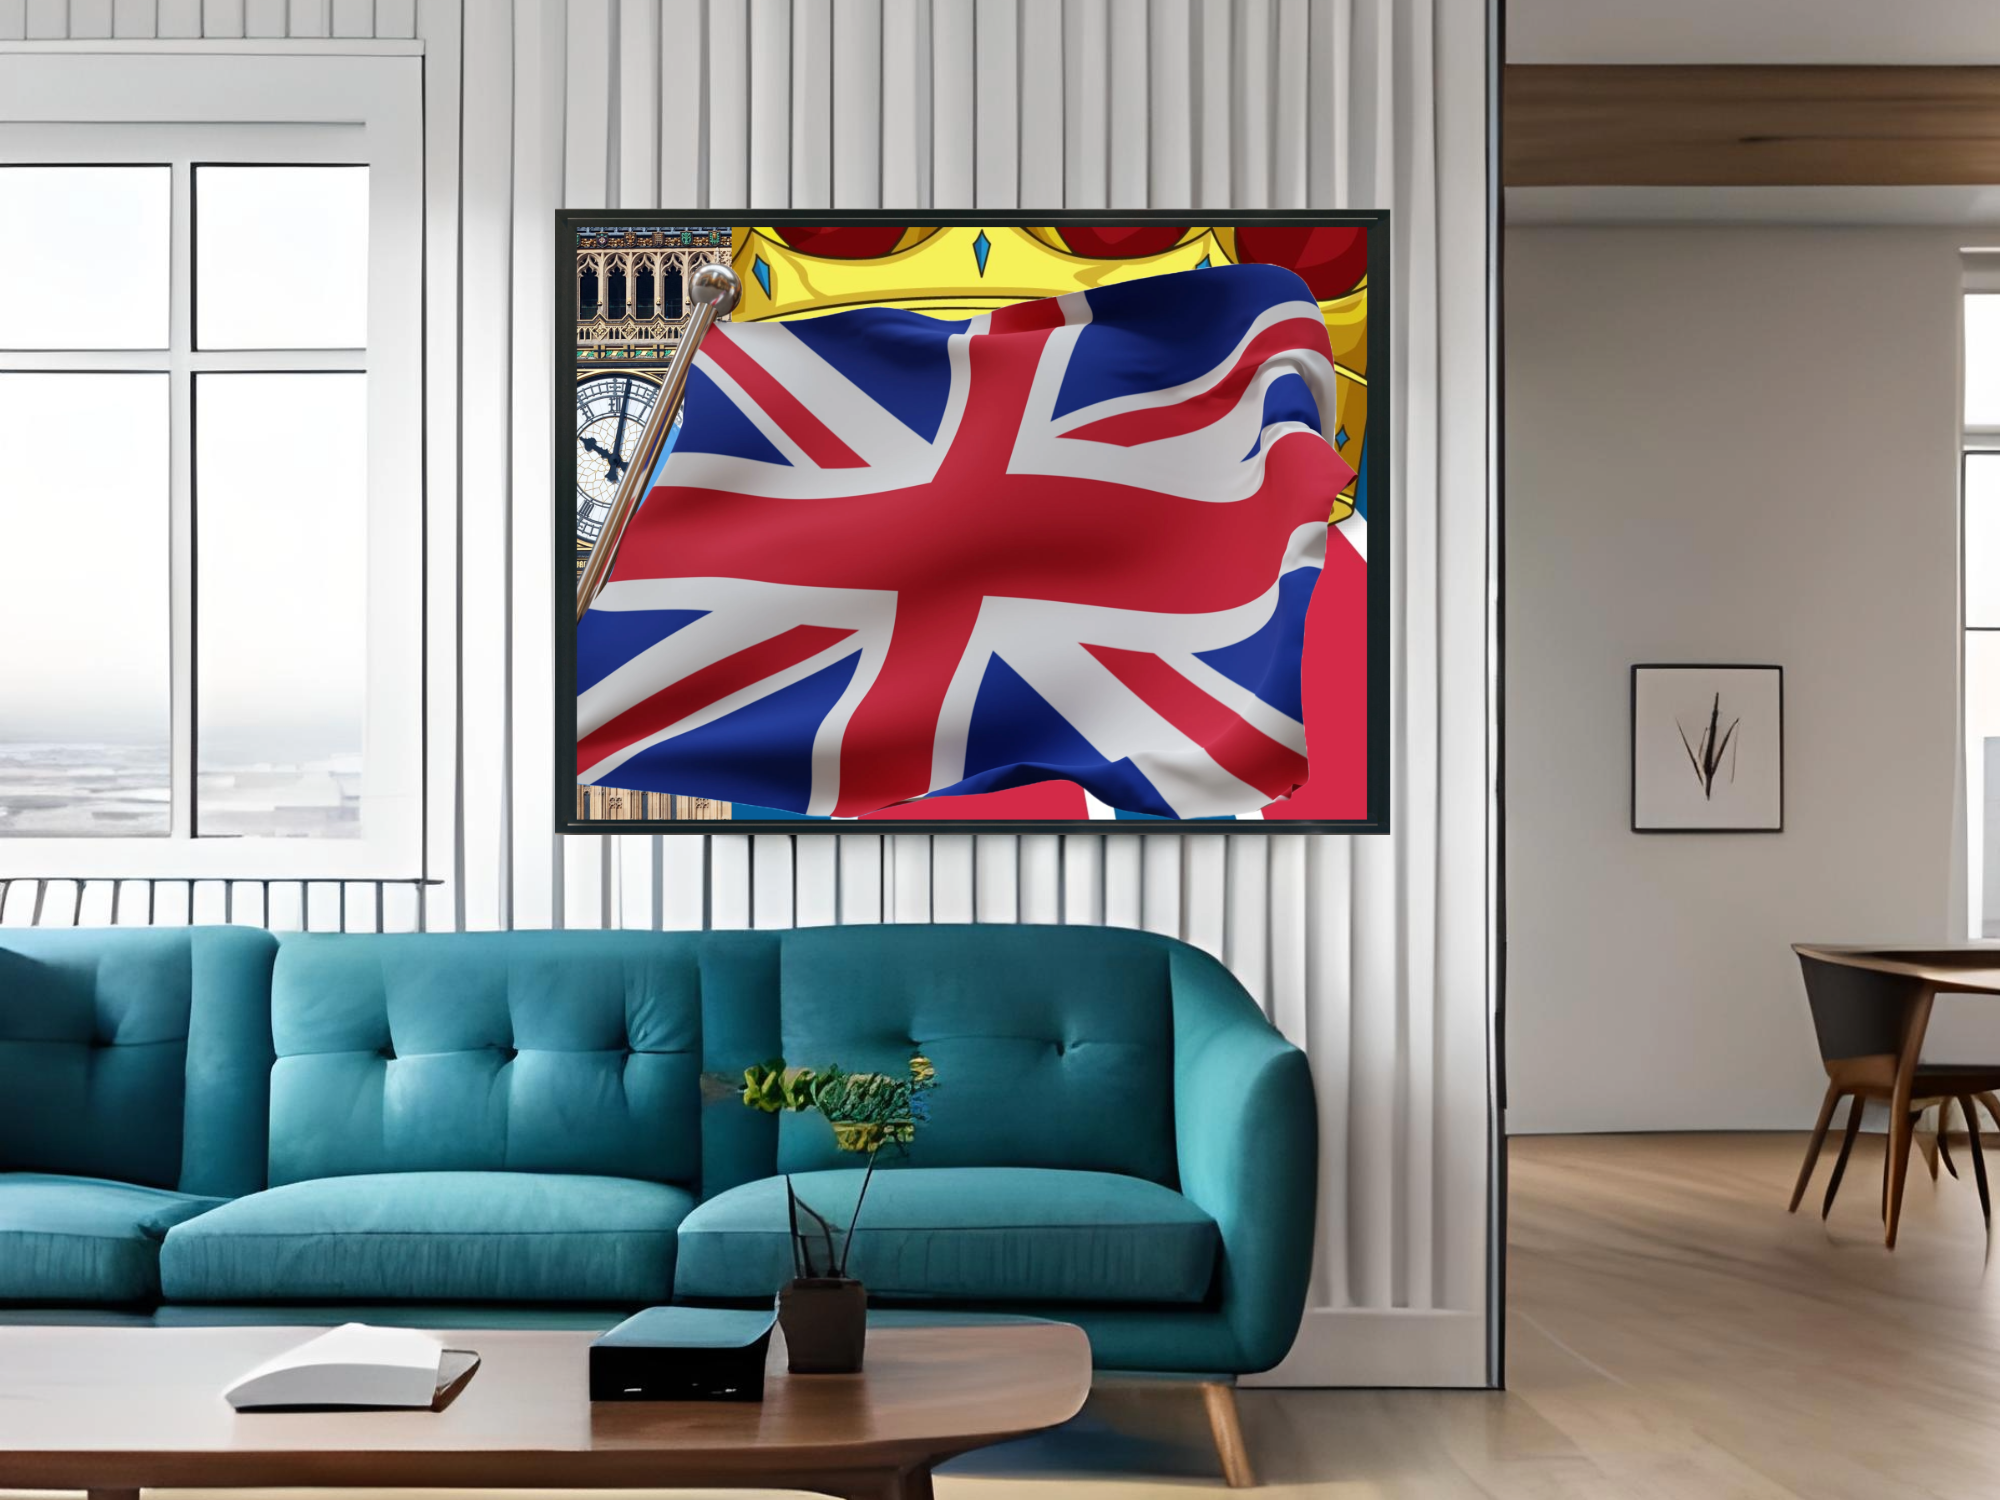 Wall Art UNITED KINGDOM UK Flag  Canvas Print + Frame Painting GW Original Giclee Love Nice Beauty Fun Design Fit Hot House Home Office Gift Ready Hang